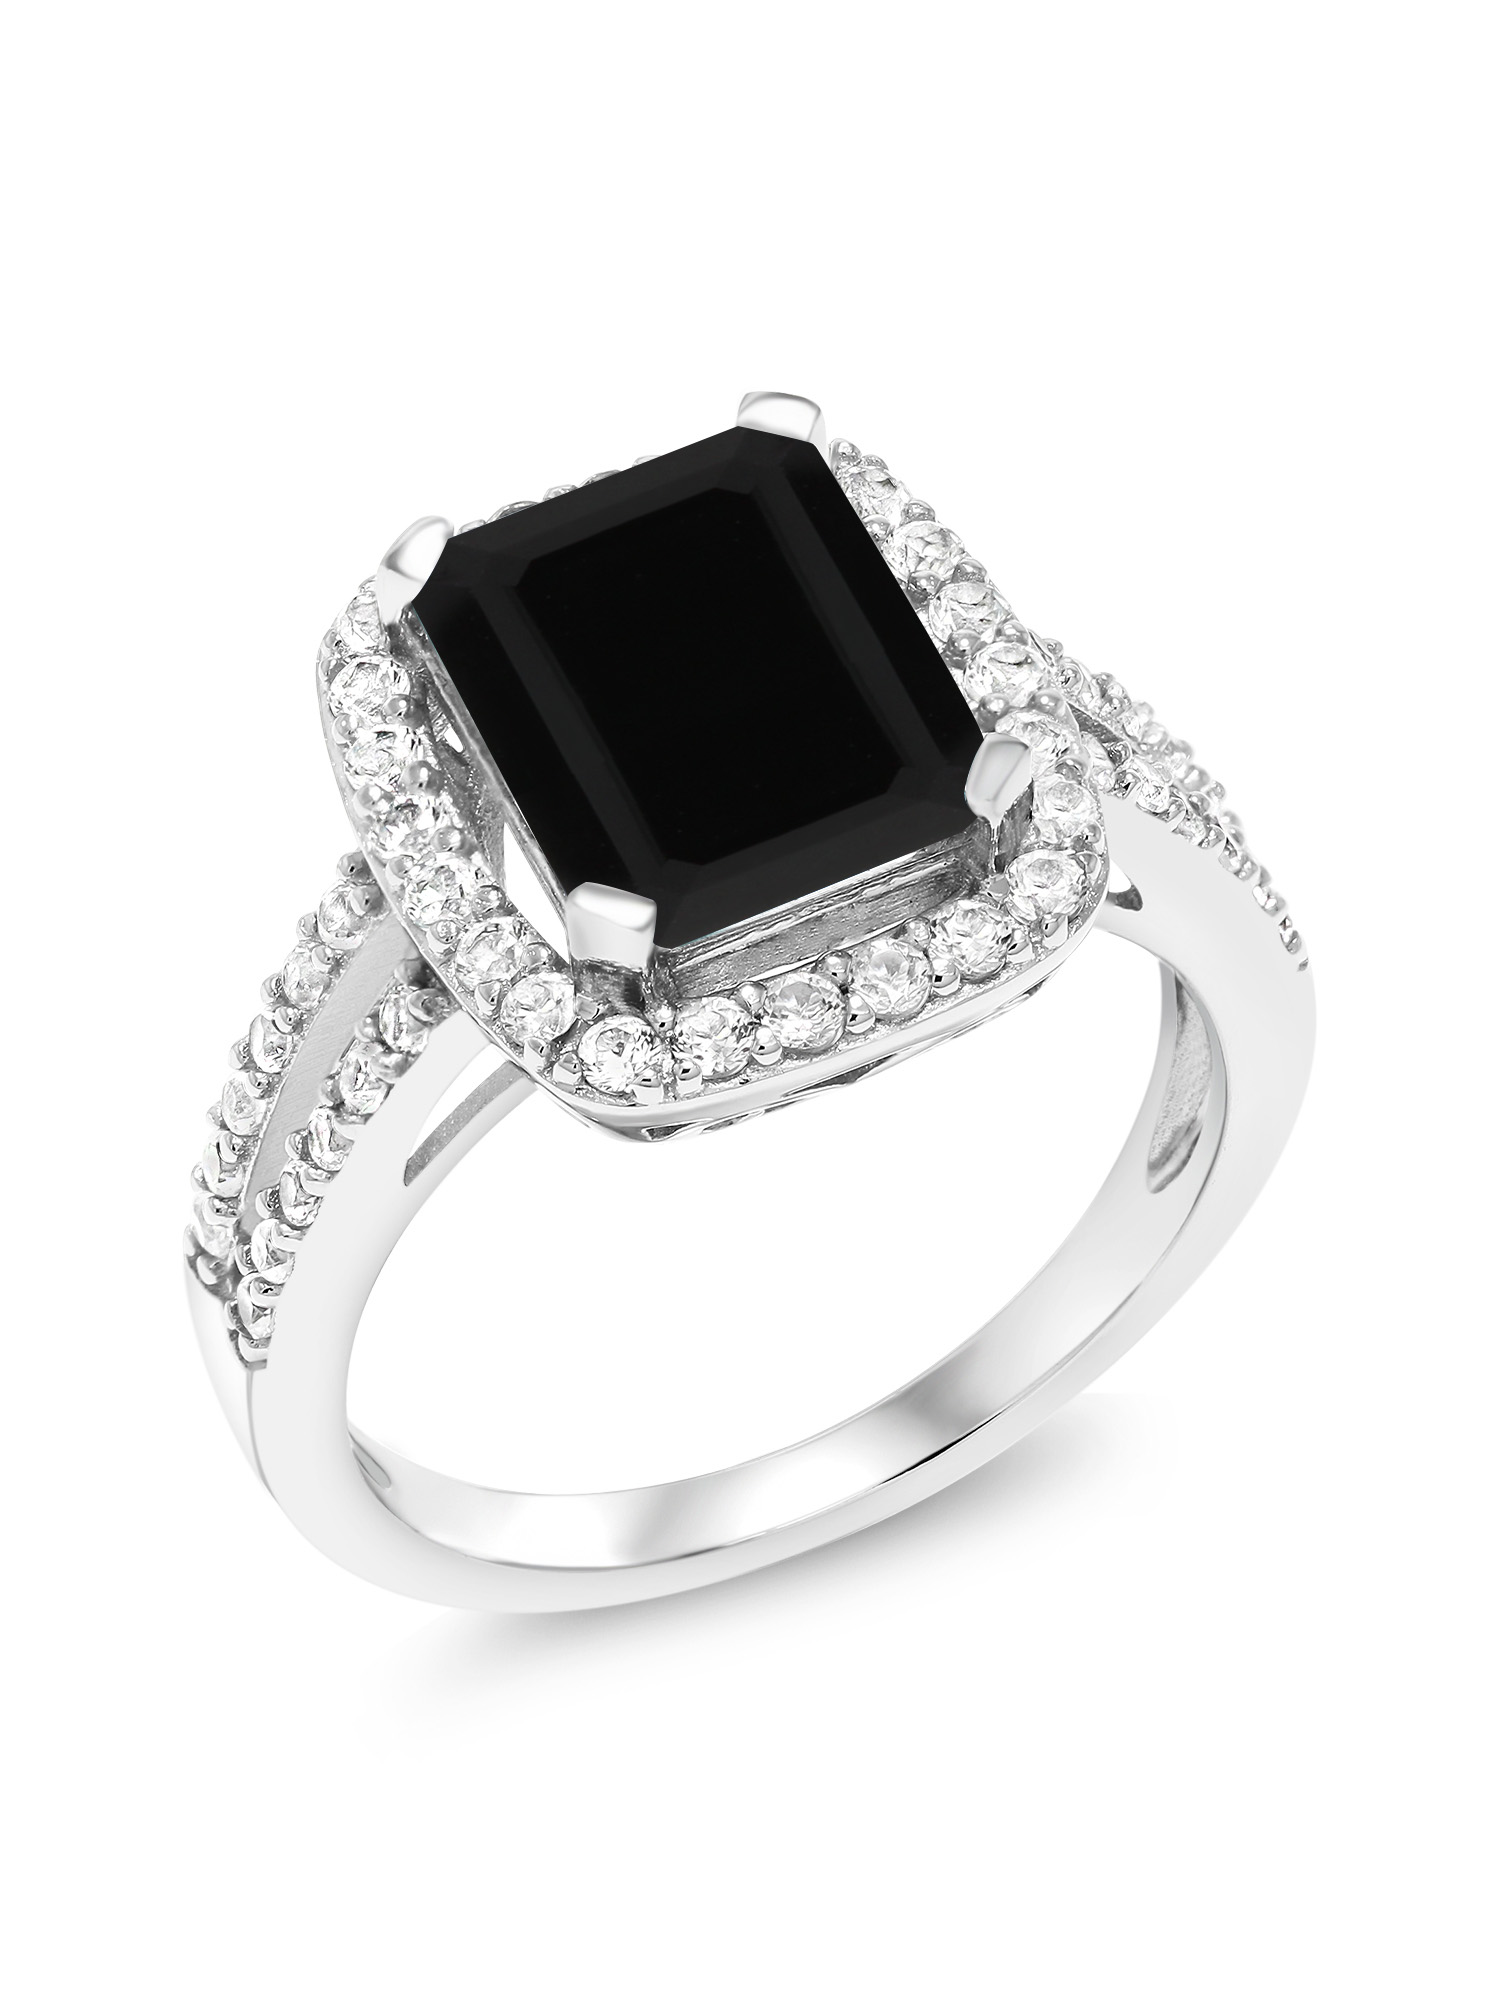 size 6 34 Sterling Silver and Black Onyx Ladies Ring